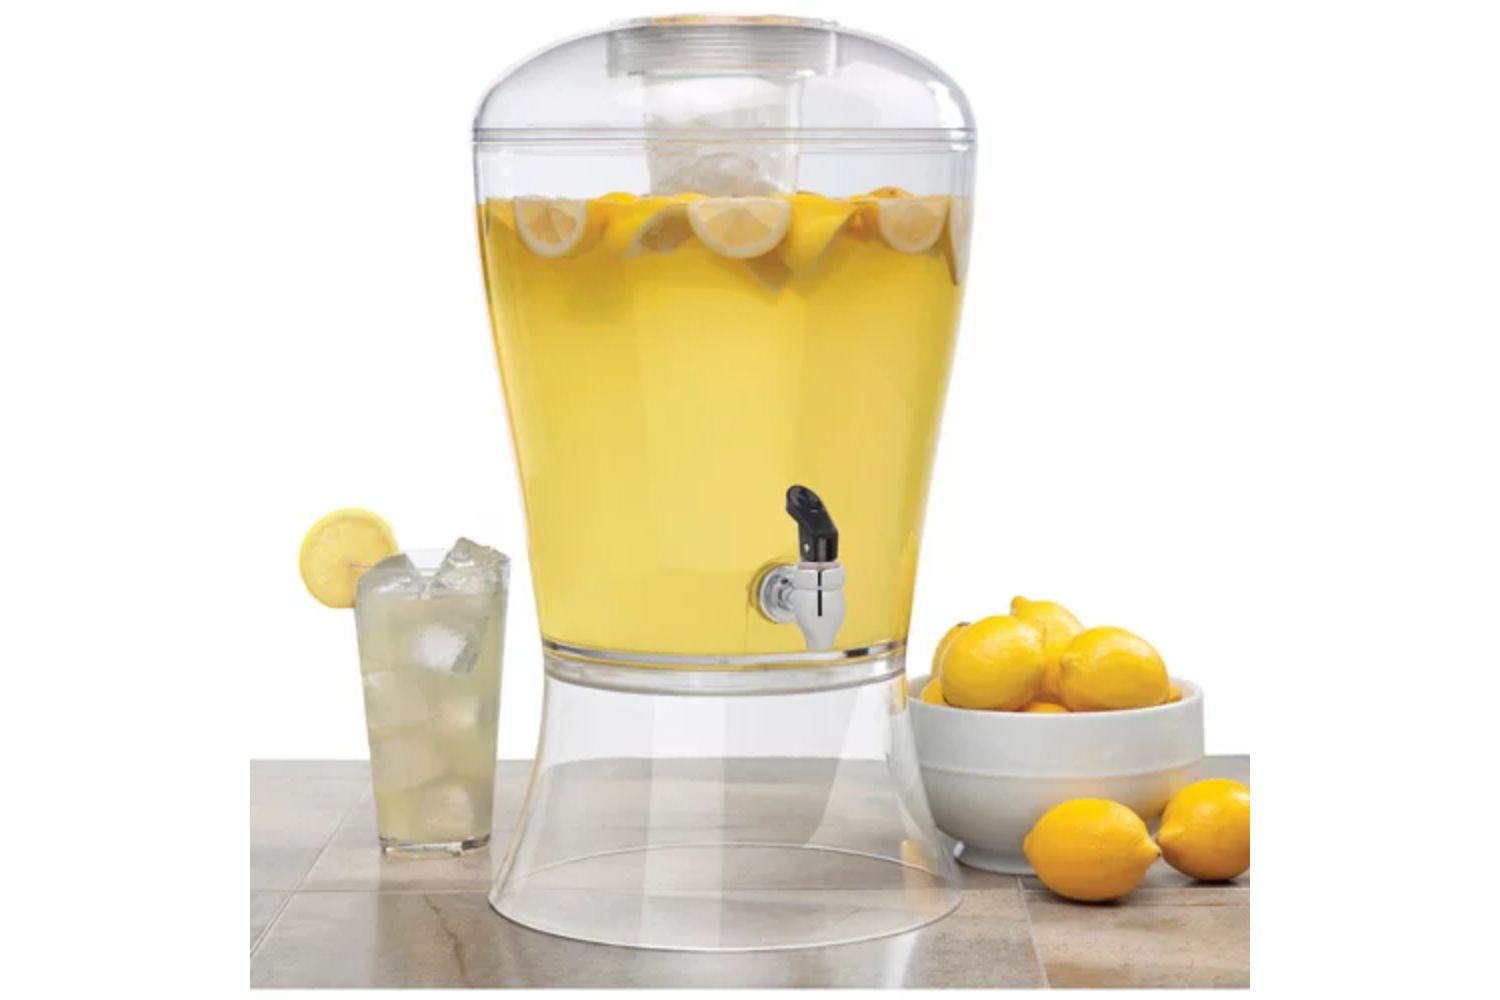 Everything You Need for a Backyard Cookout Options: reative Bath Beverage Dispenser